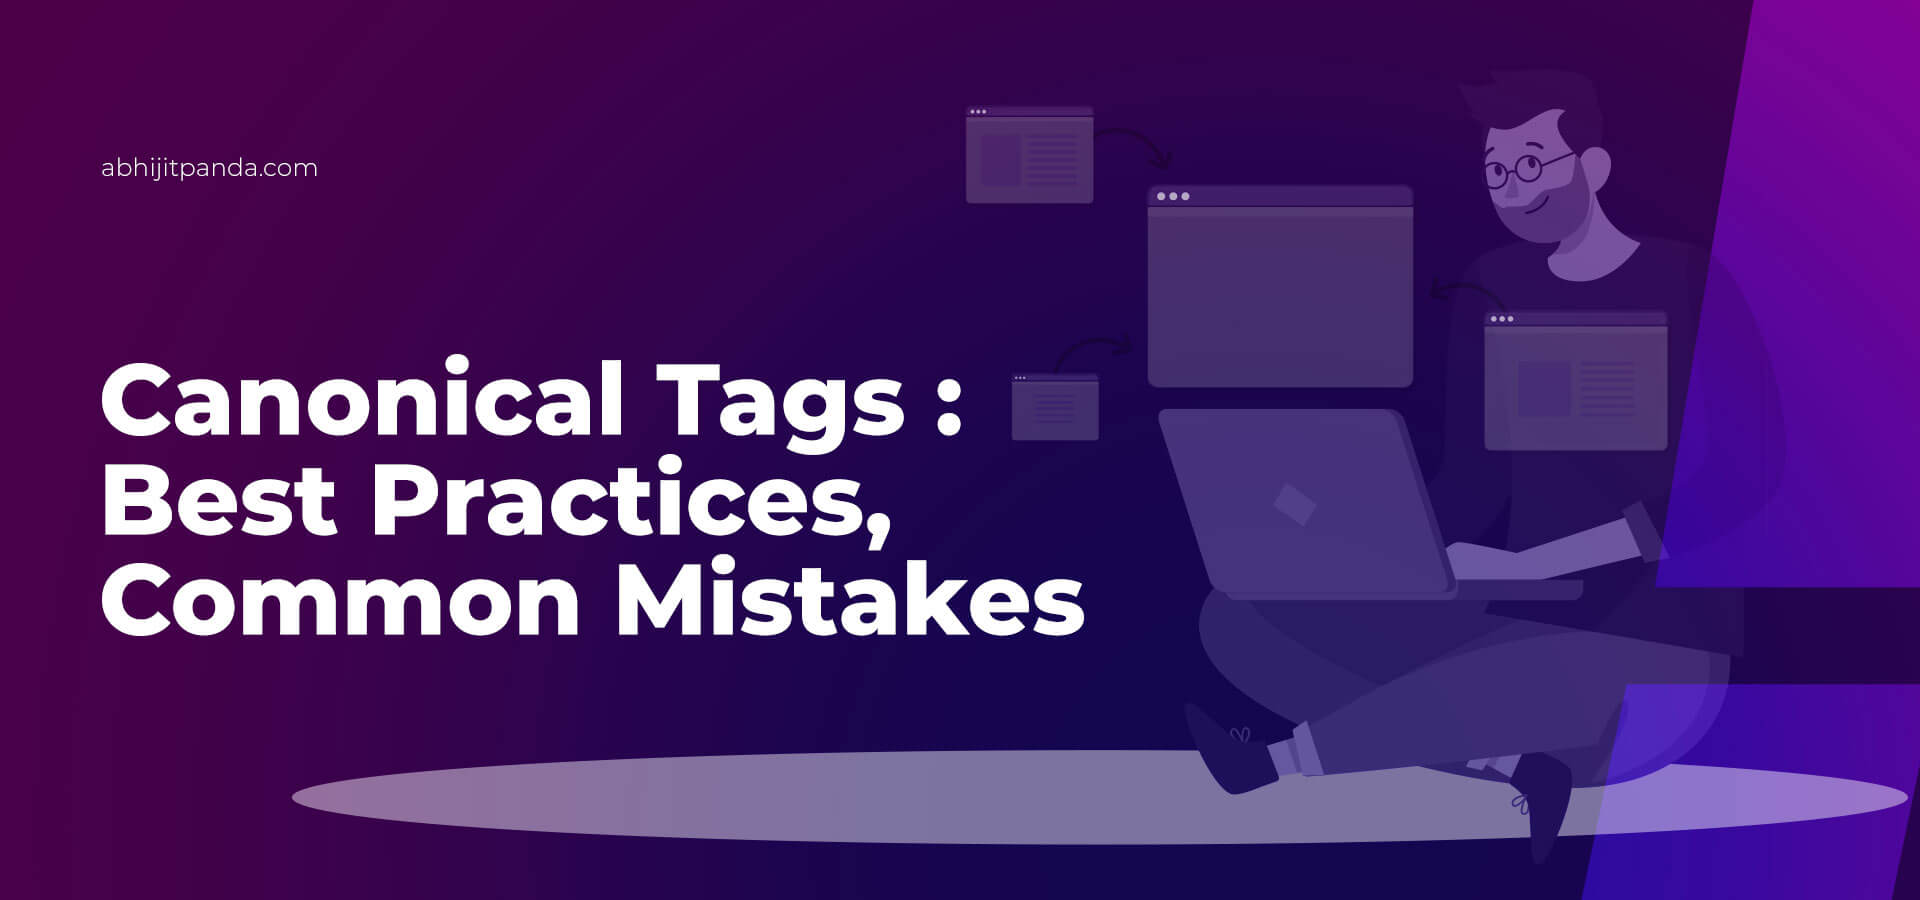 Canonical Tag Best Practices and Common Mistakes